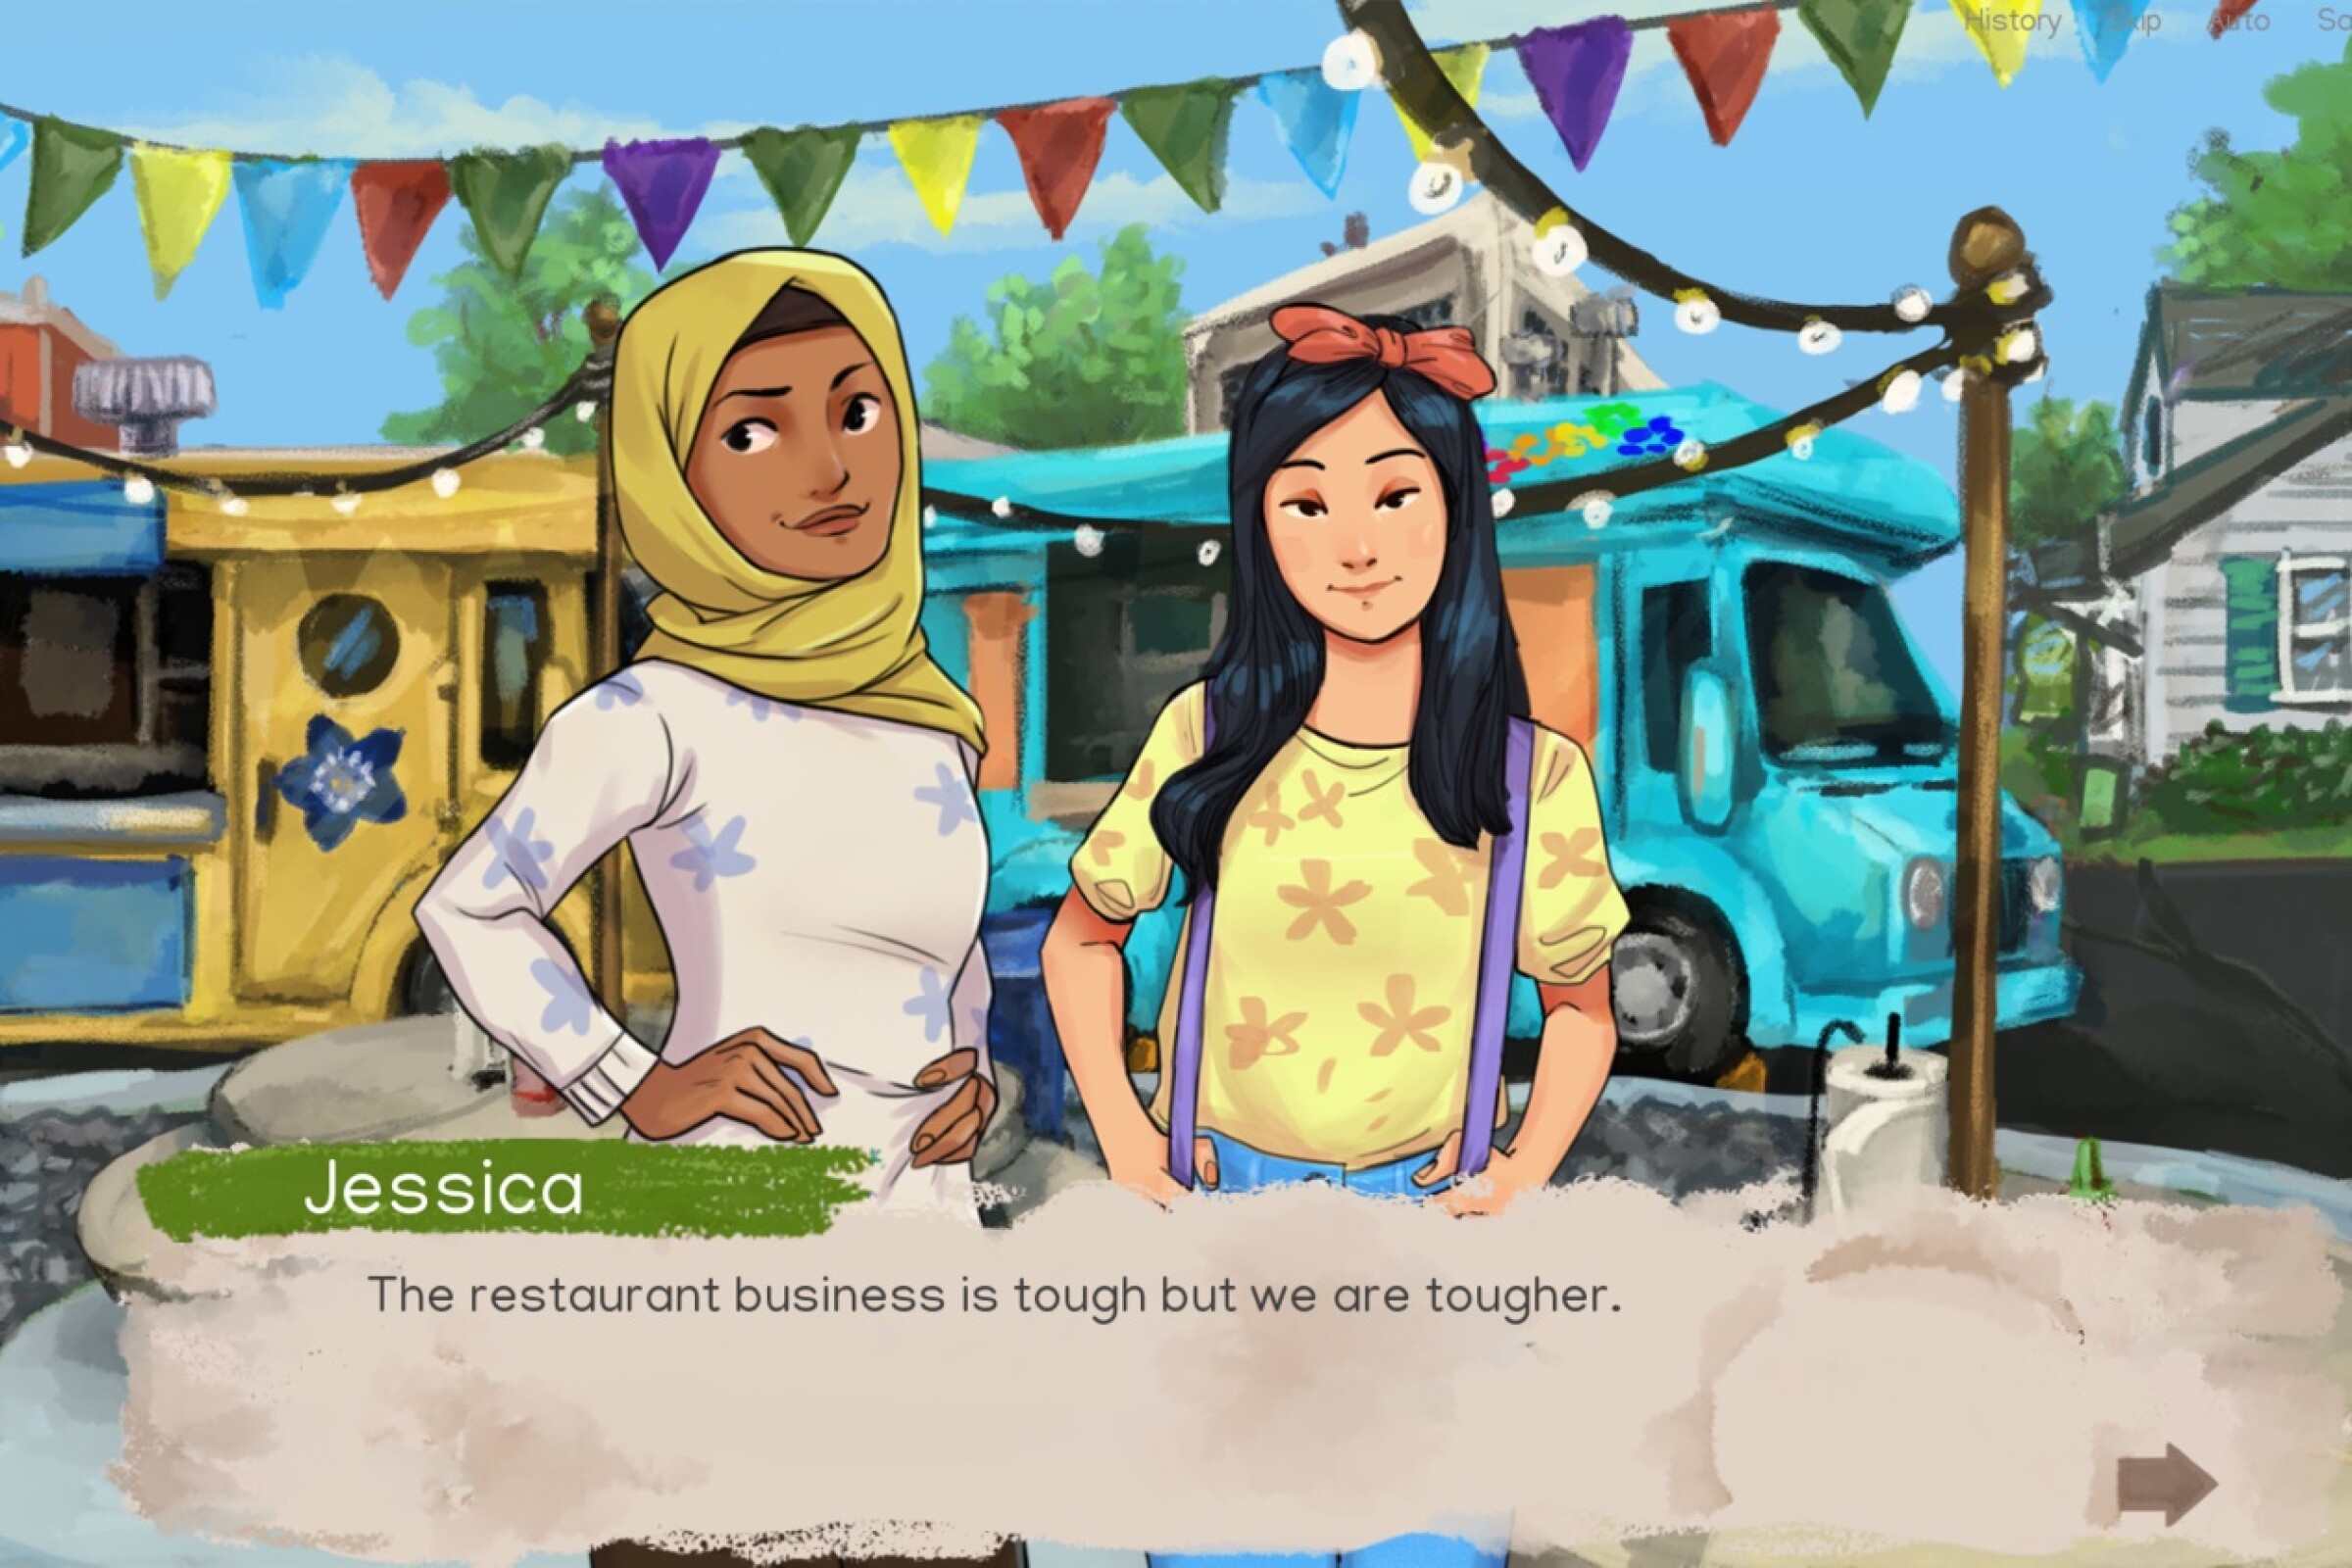 An illustration of two young women and food trucks